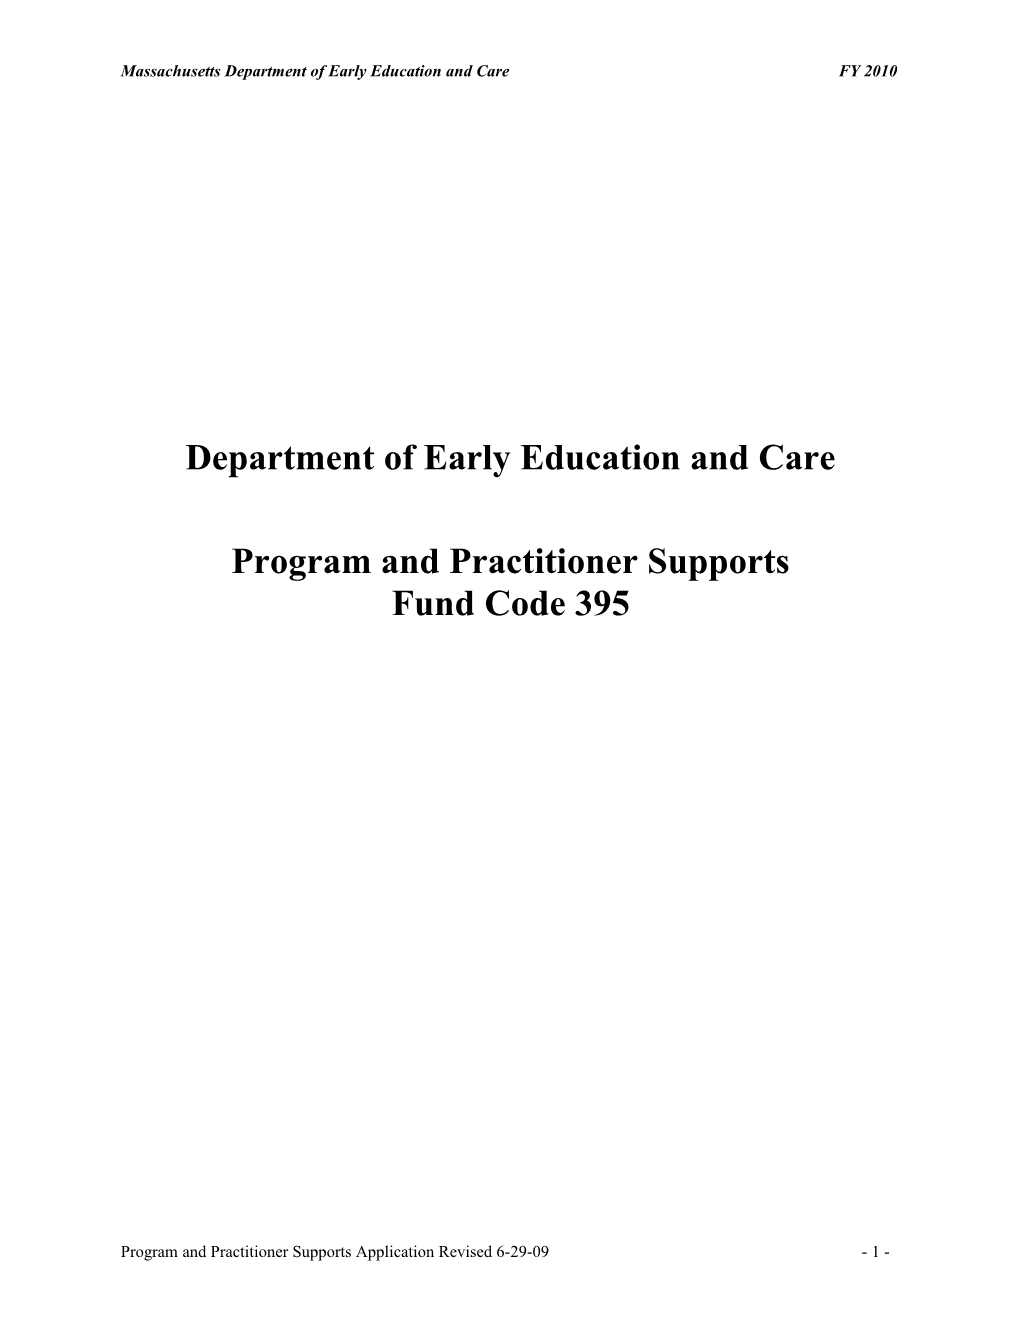 Massachusetts Department of Early Education and Care FY 2010